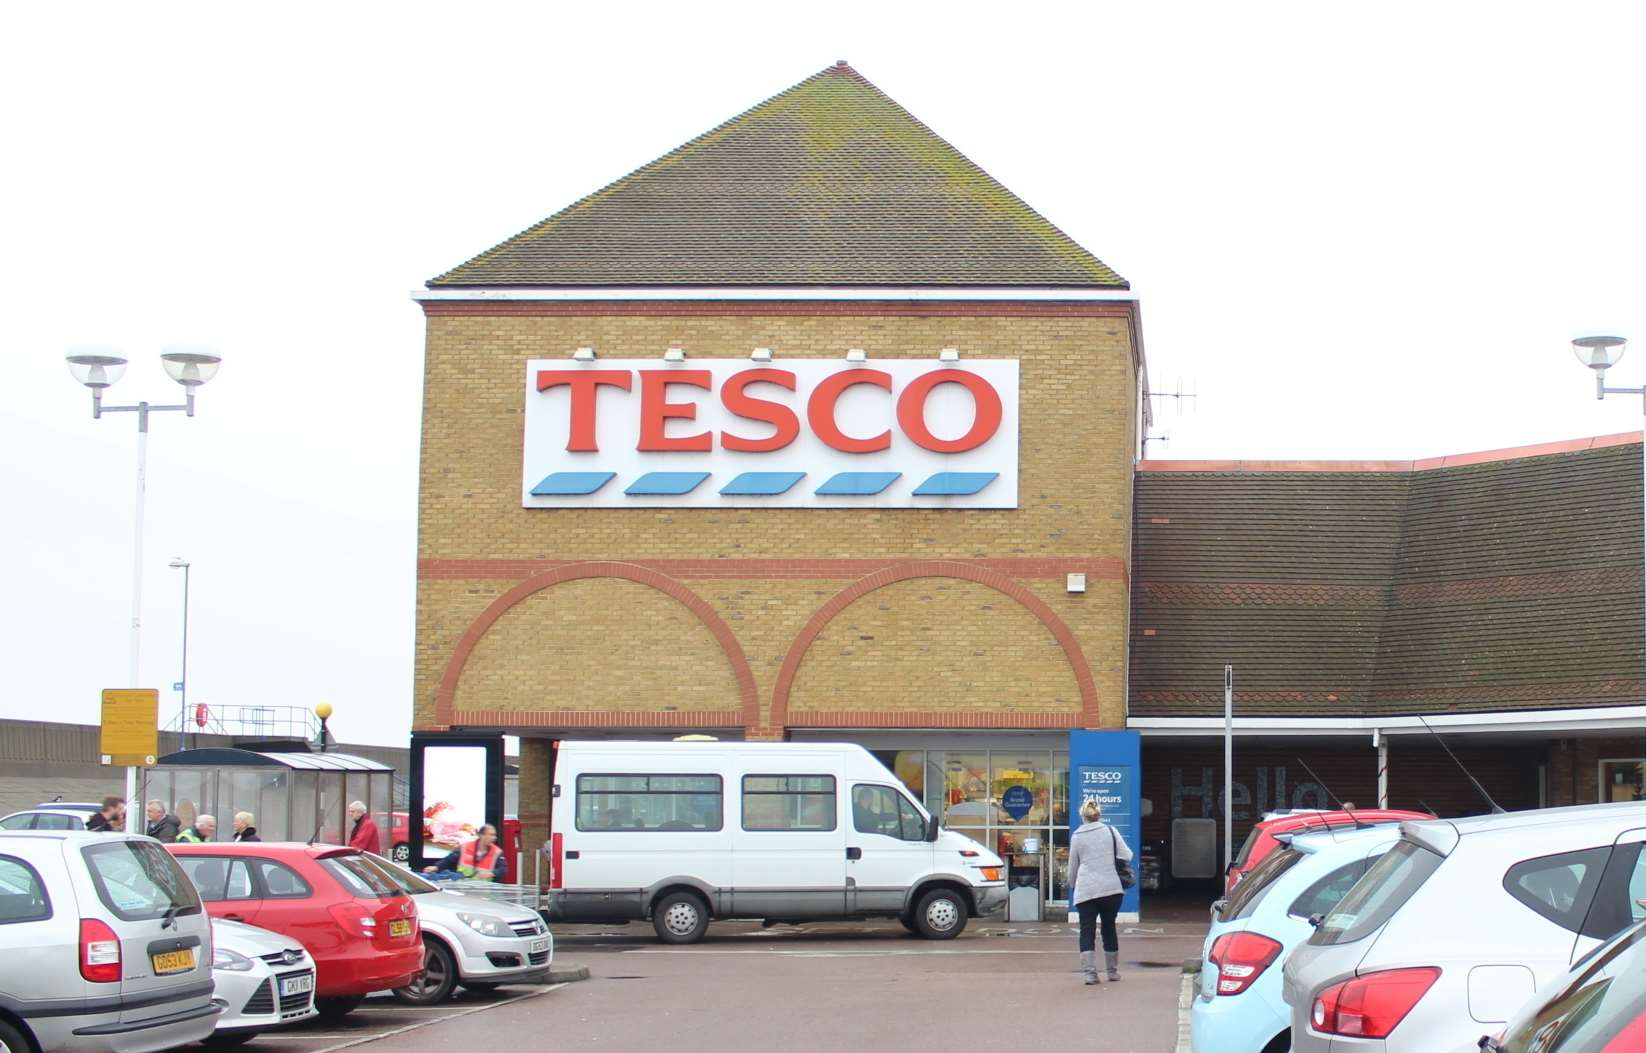 The hours at many Tesco stores are different over Easter